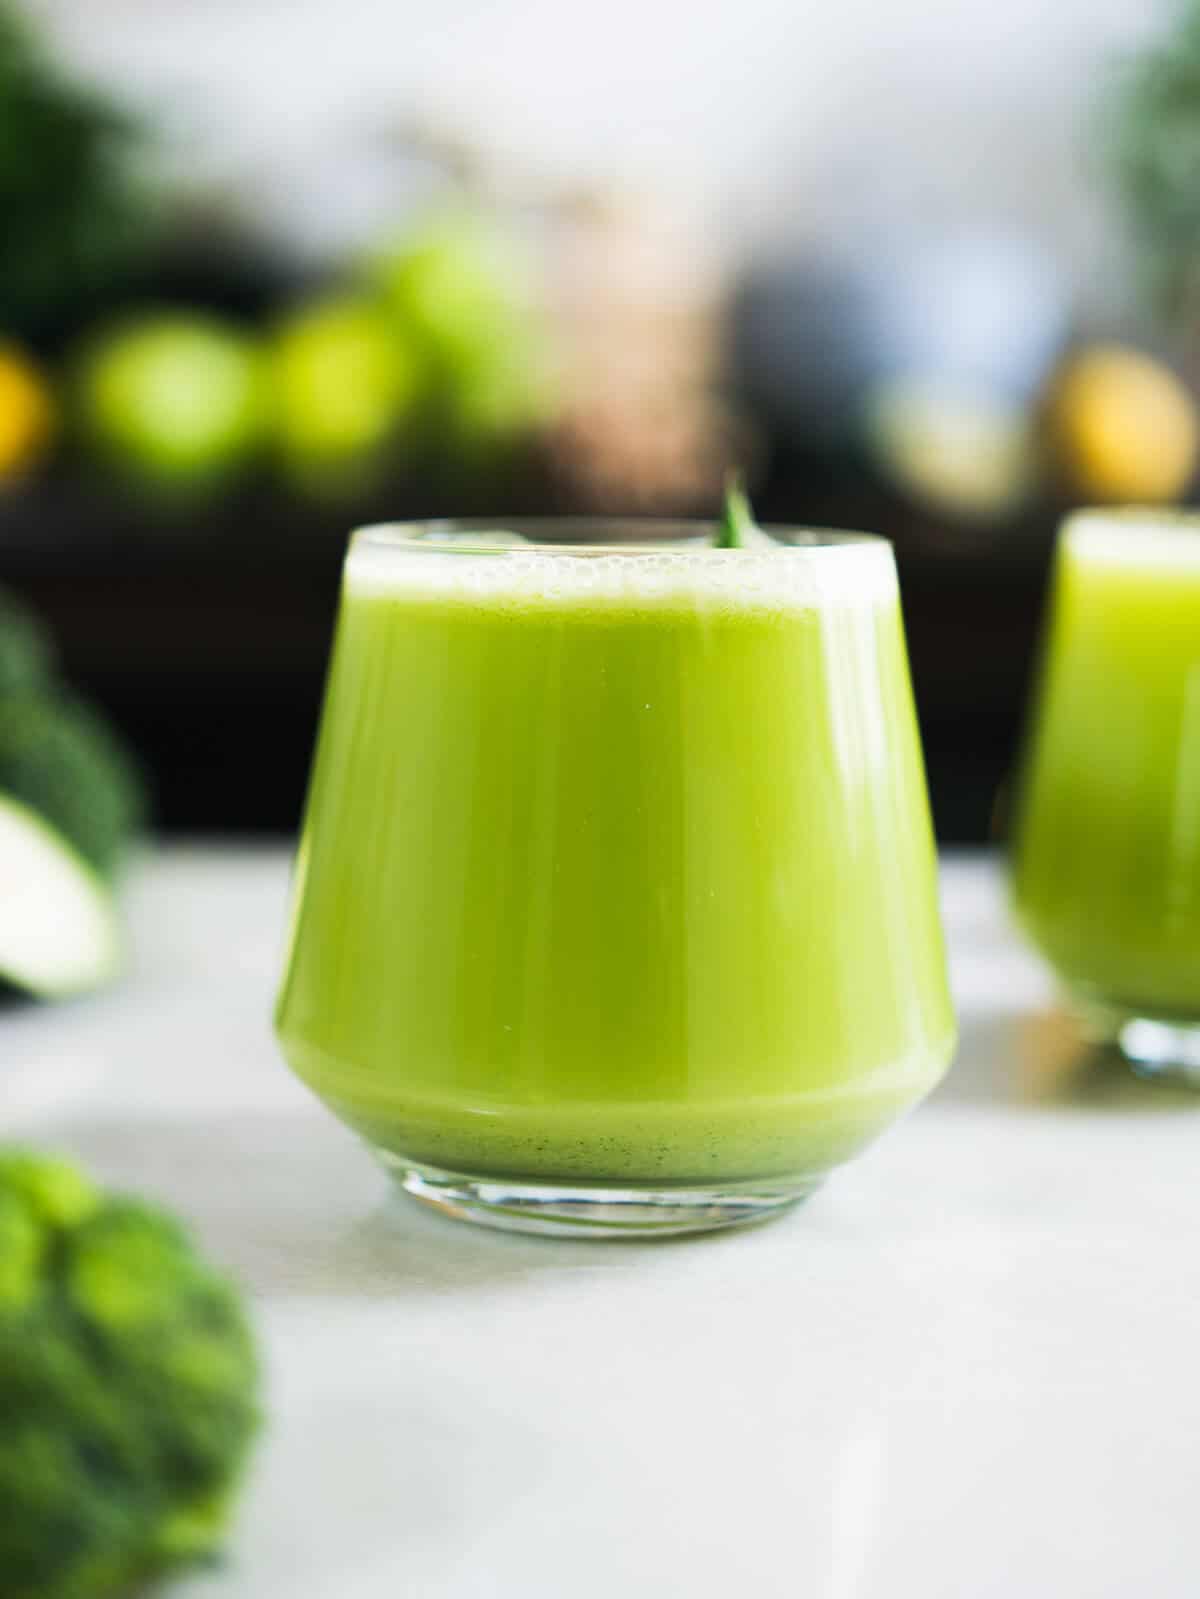 two glasses of broccoli green juice served.